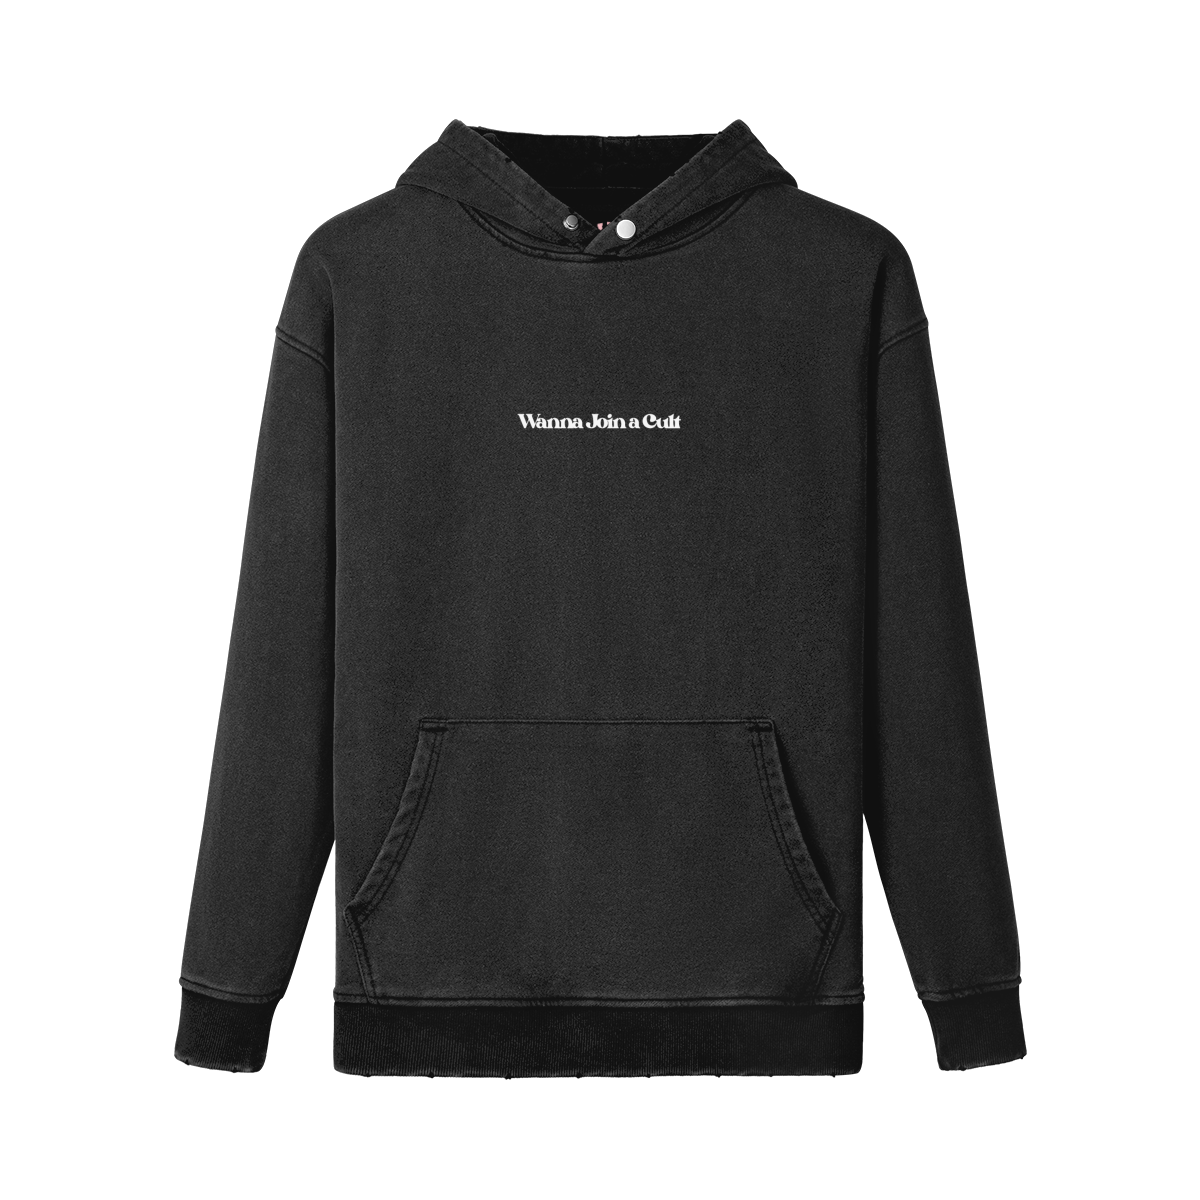 Wanna Join a Cult Hoodie